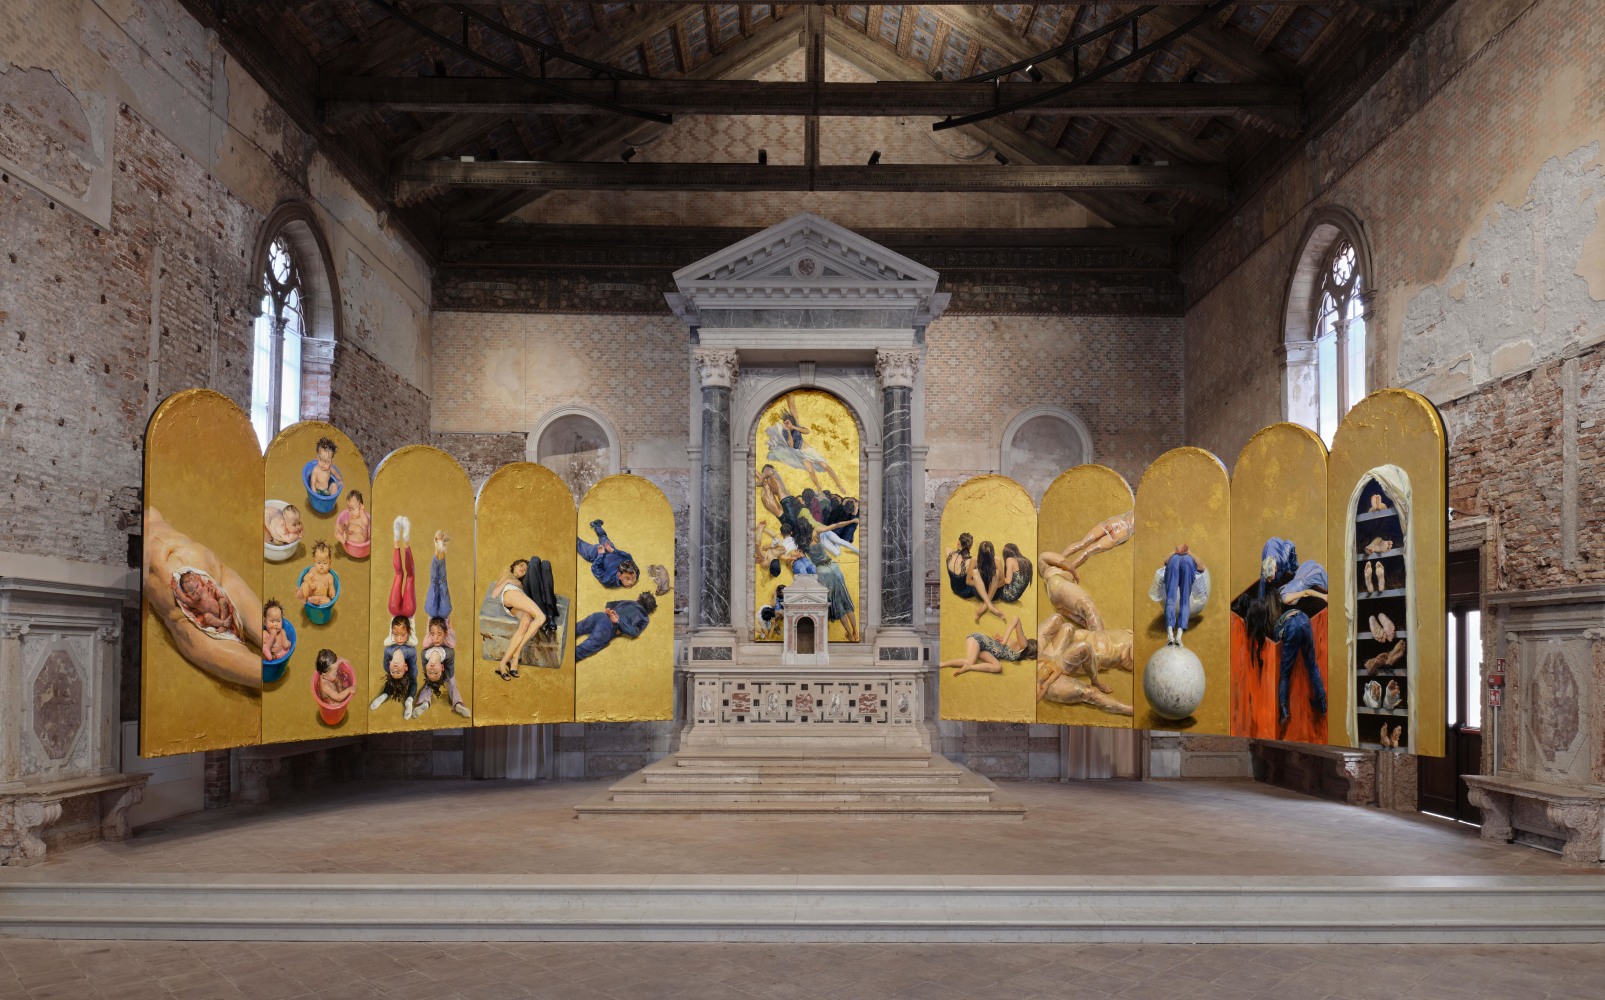 Installation view of &amp;quot;Yu Hong &amp;ndash; Another One Bites the Dust&amp;quot; at Chiesetta della Misericordia, Venice, 2024. Photo by George Darrell. Courtesy Lisson Gallery and Asian Art Initiative of the Guggenheim Museum, New York.